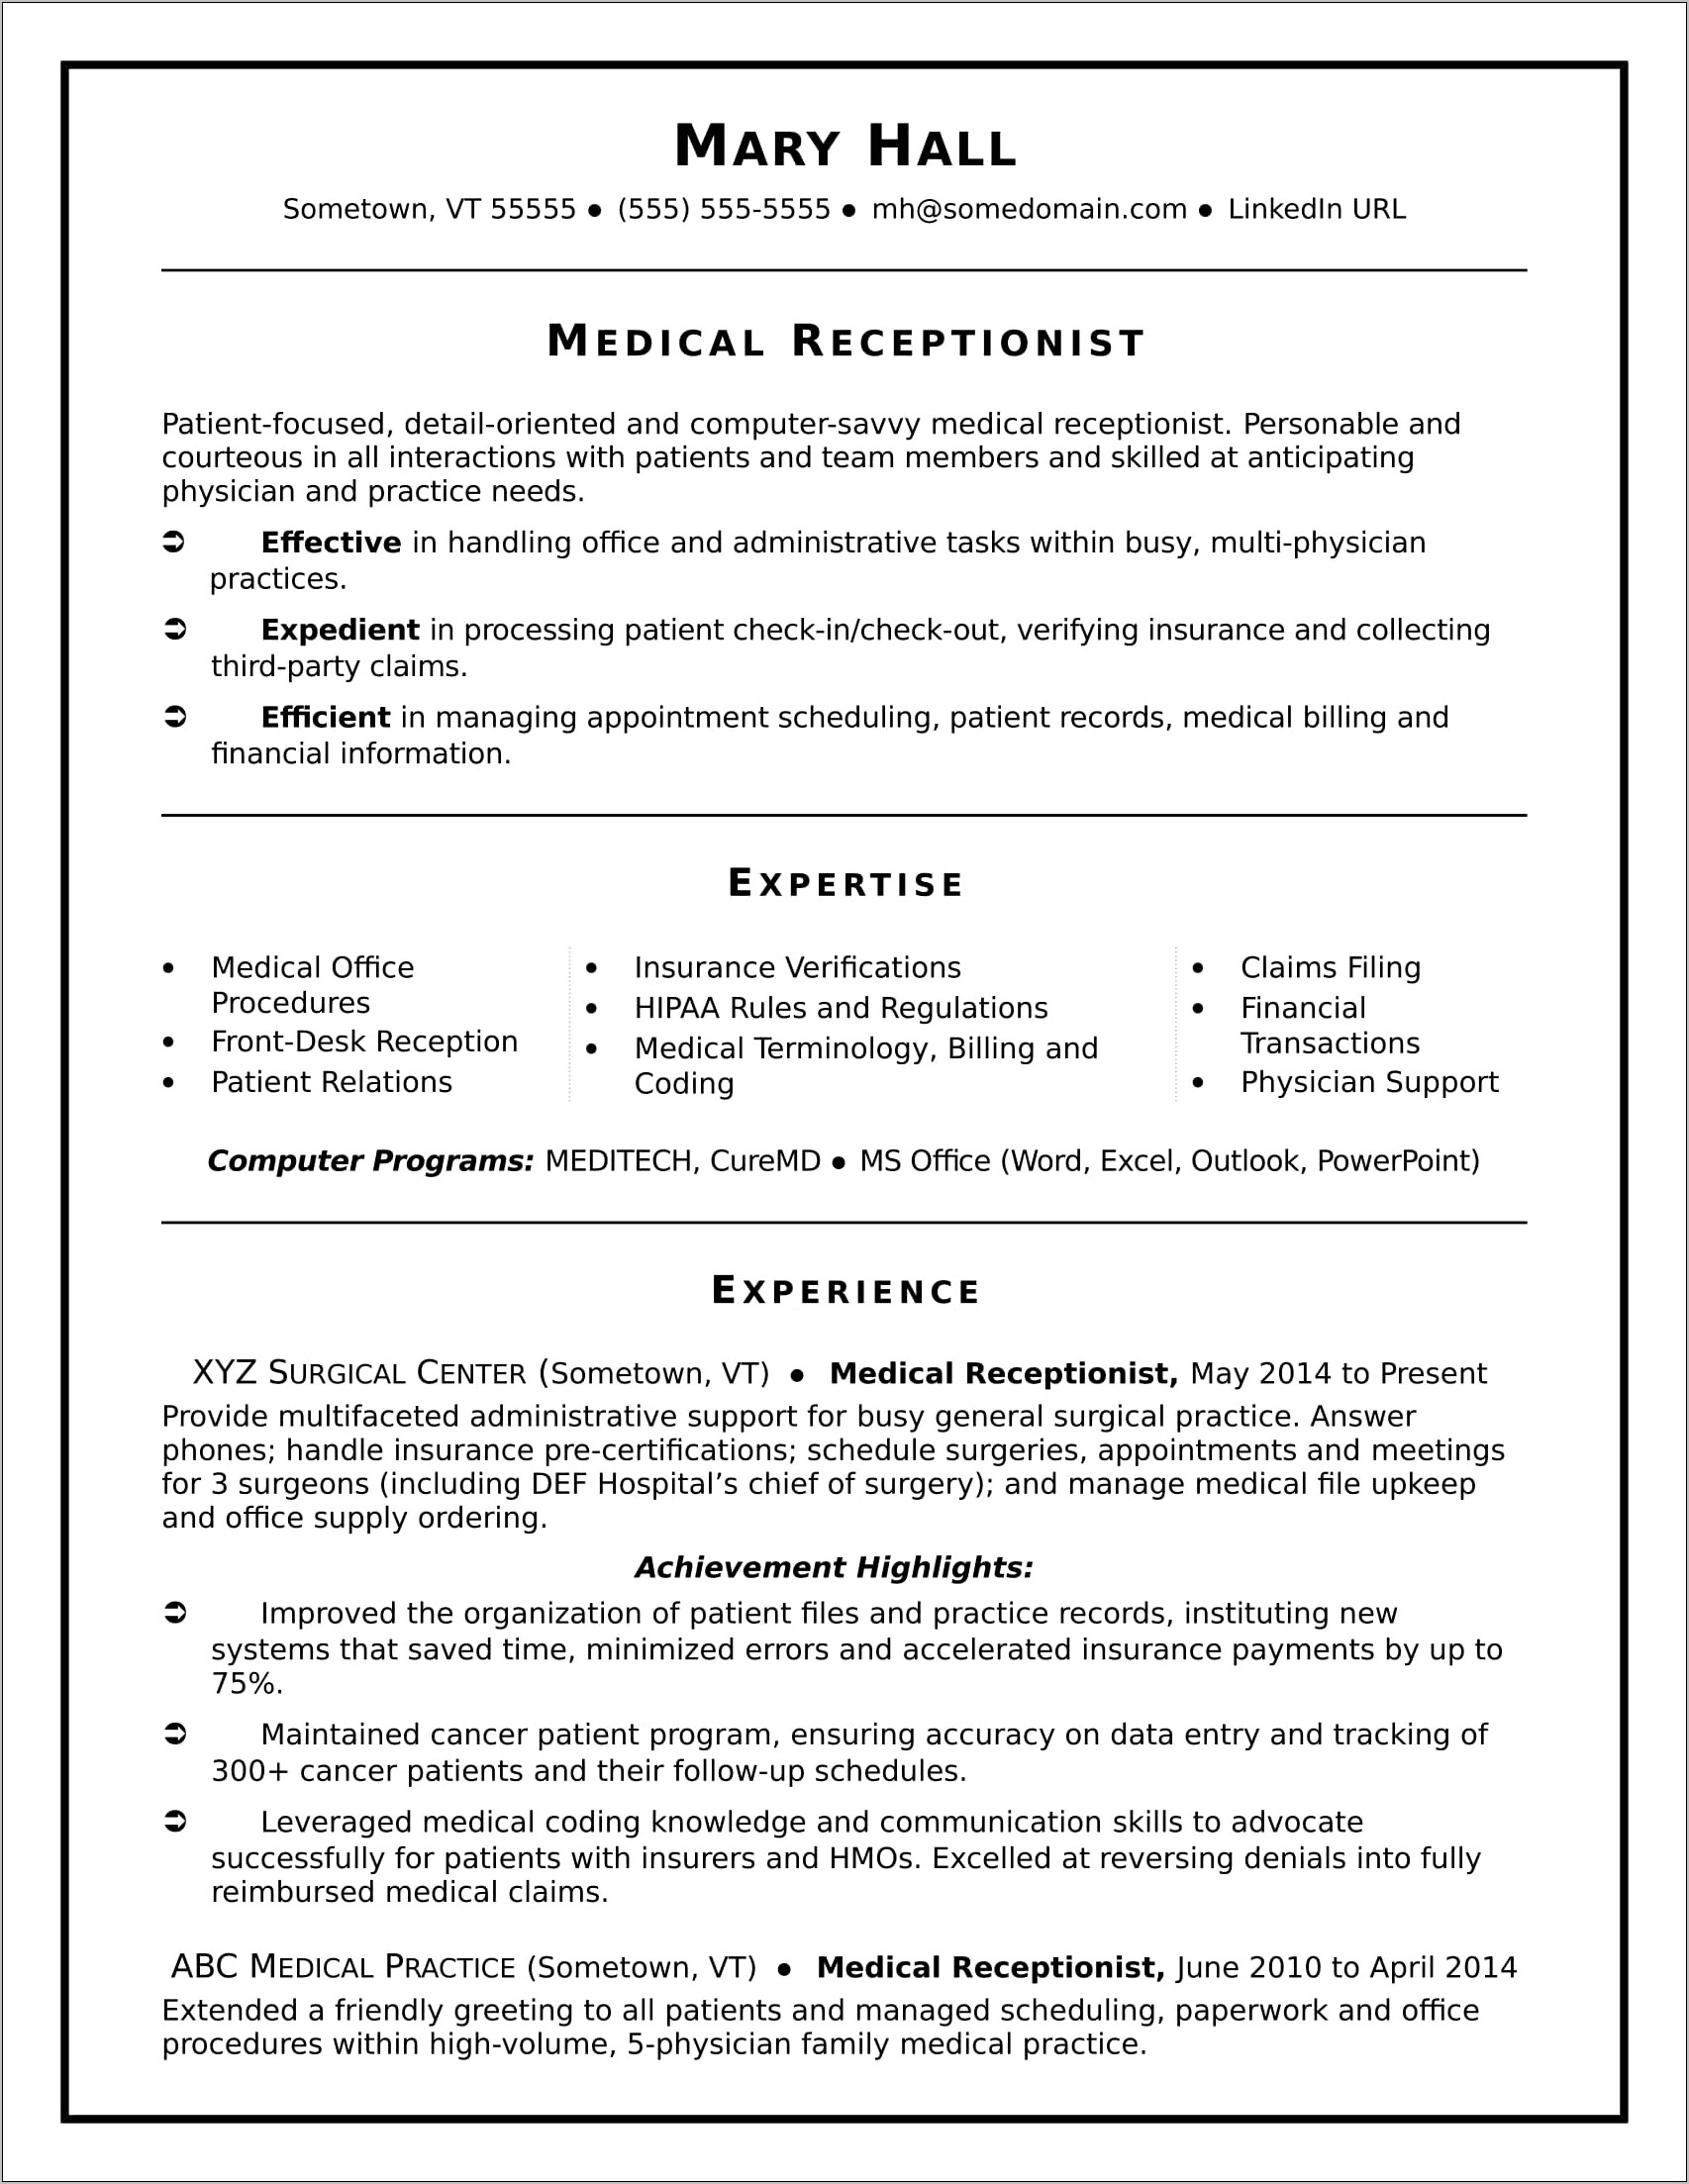 Healthcare Administration Resume Objective Statement